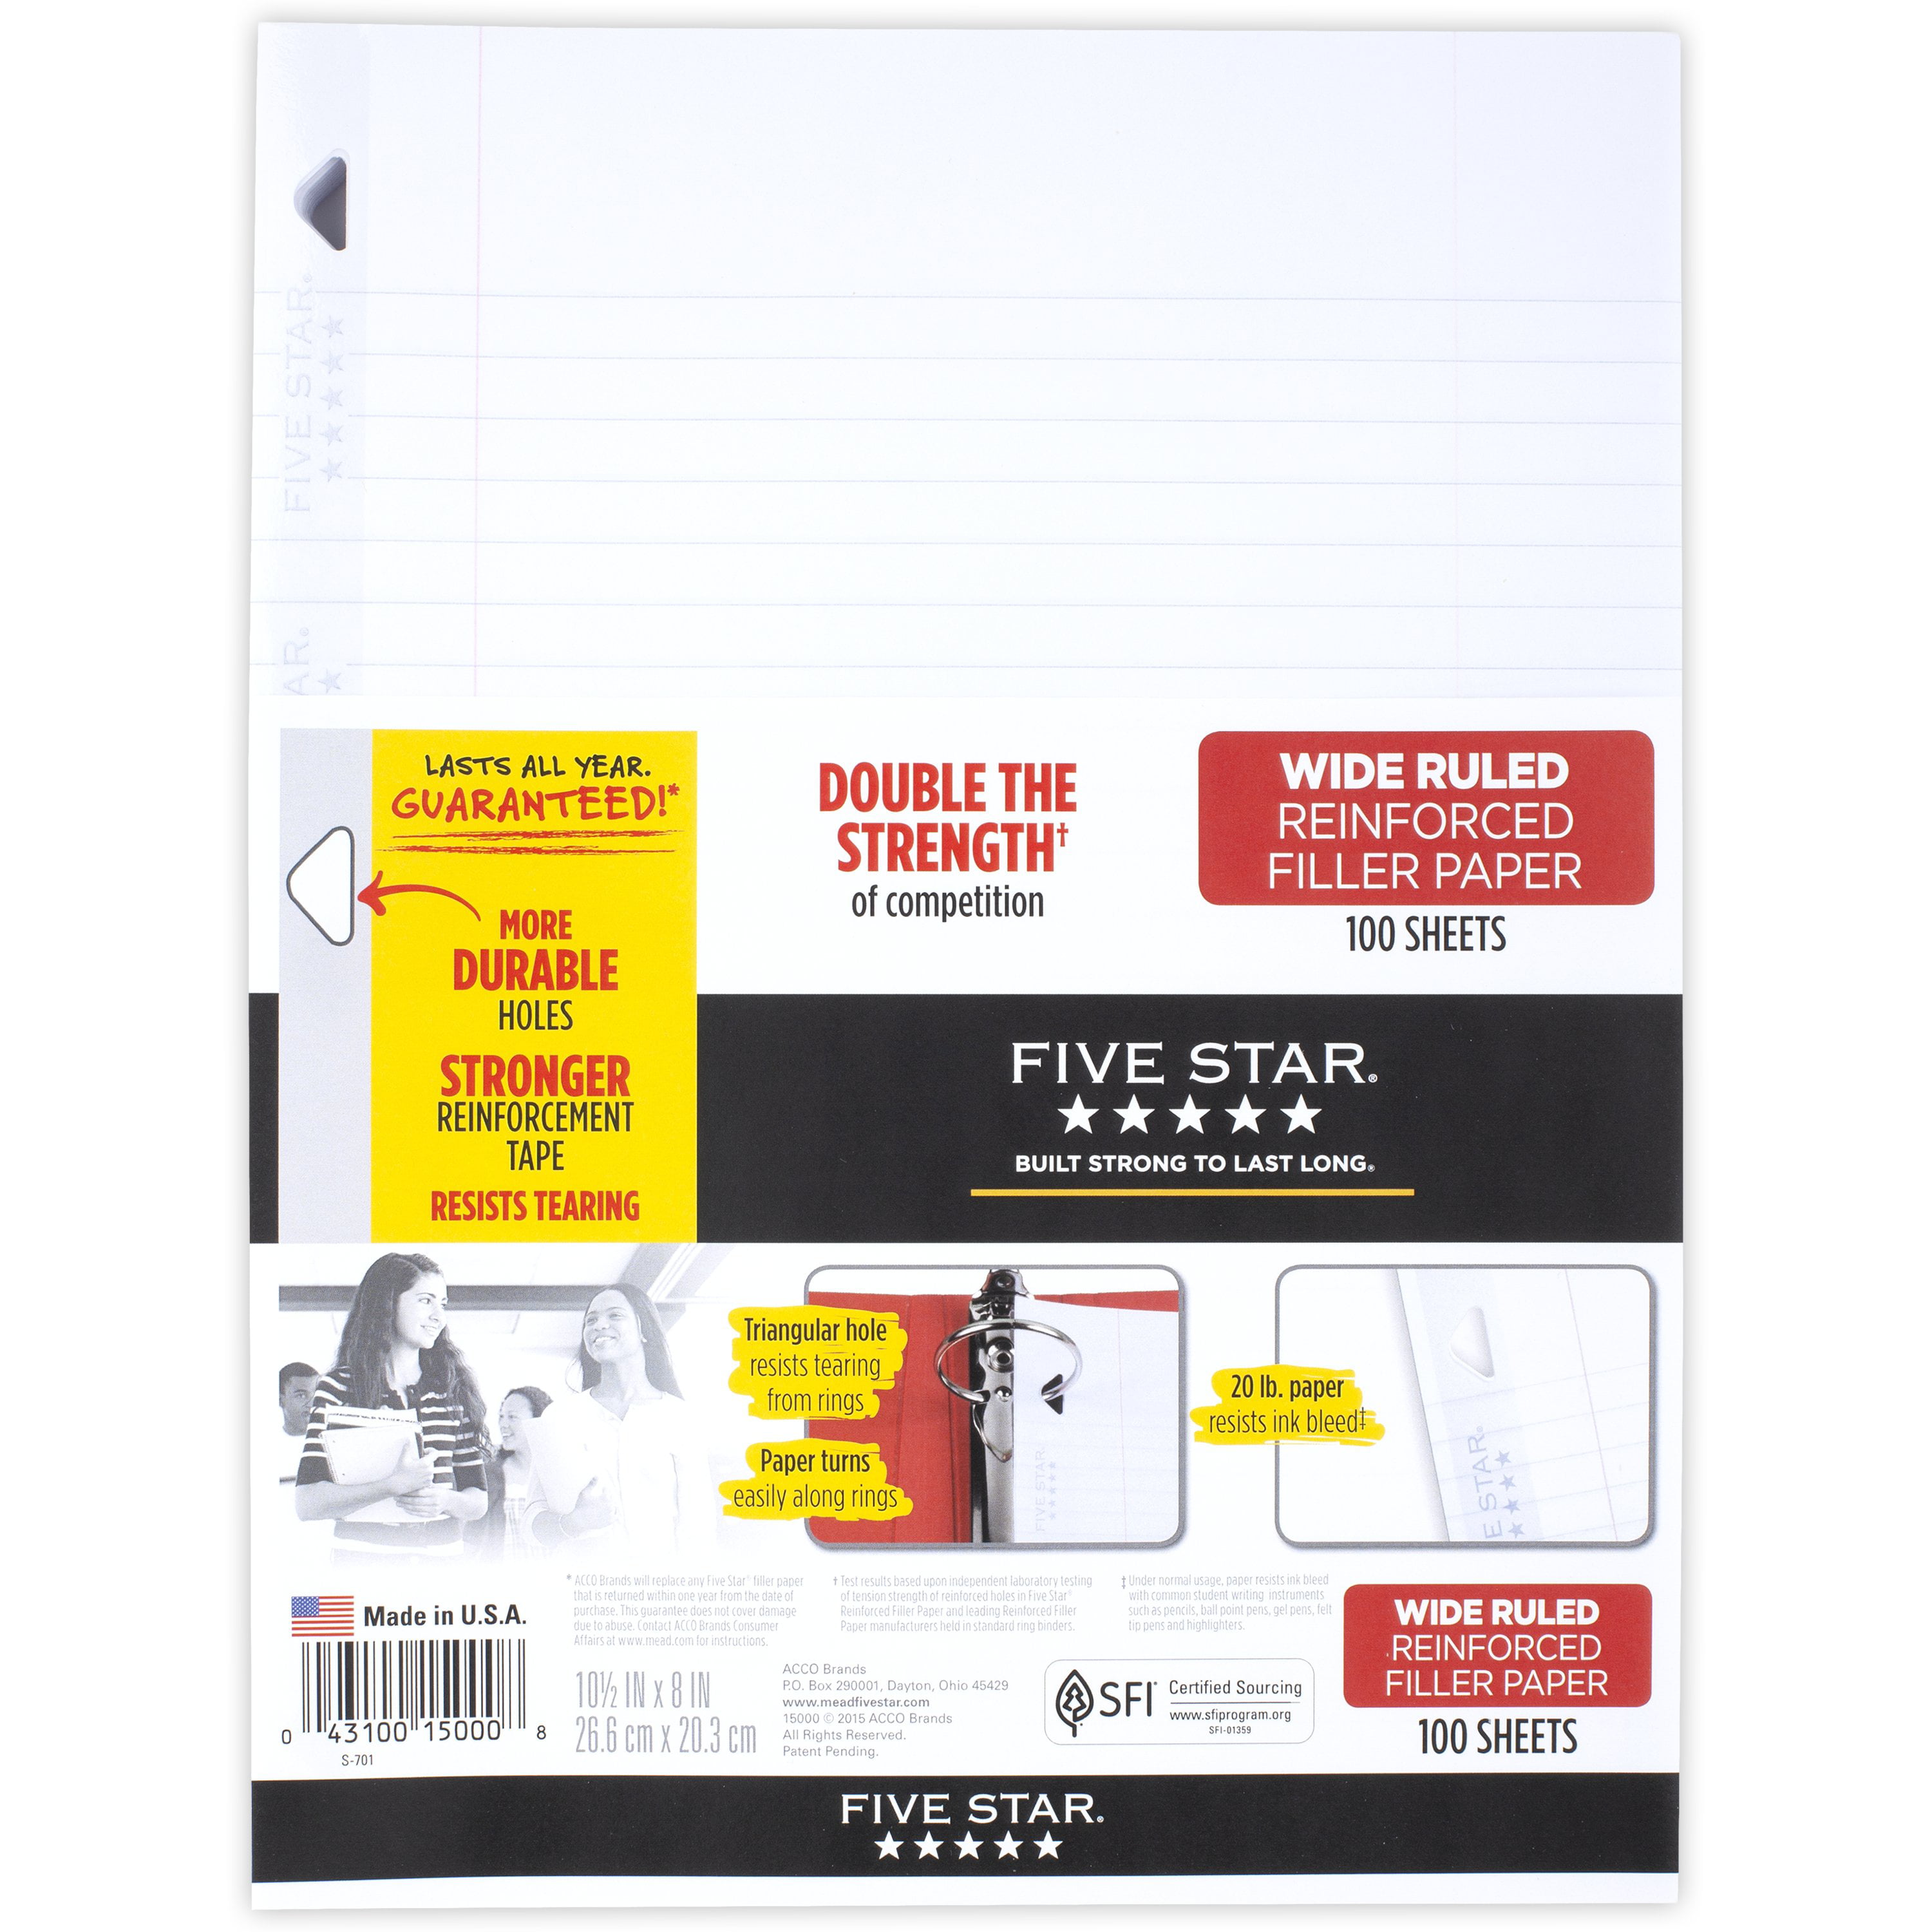 Five Star Loose Leaf Paper Reinforced Filler Paper Limited EDition 100 Sheets/Pack 3 Hole Punched 3 Pack 10-1/2 x 8 inches Wide Ruled 